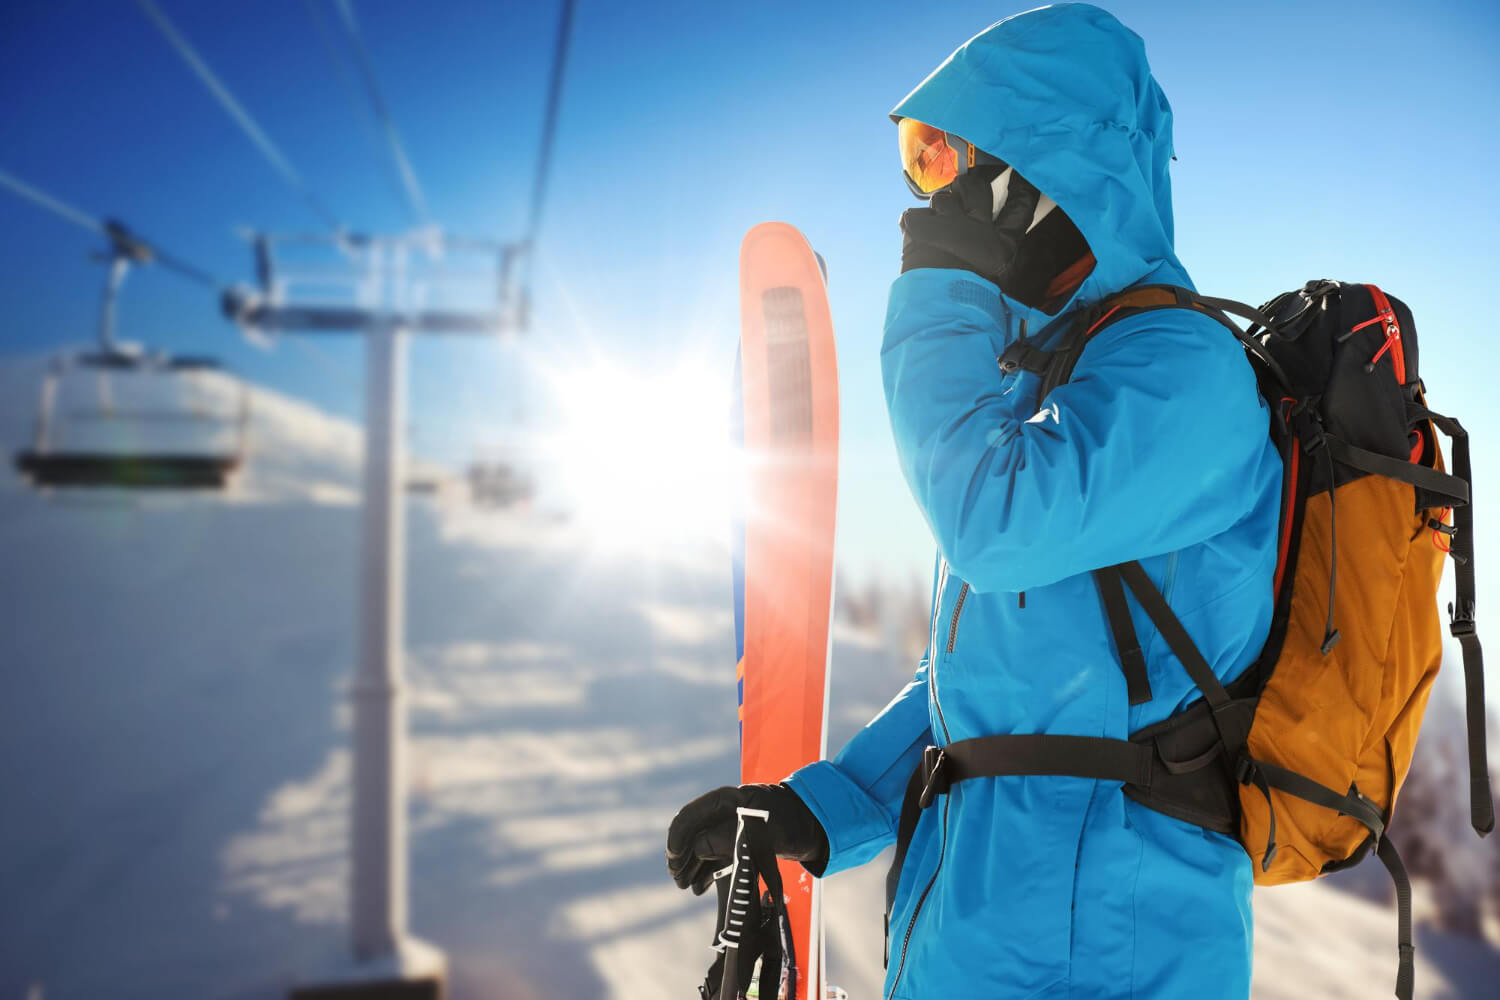 discover the best must-have ski accessories and ski gear for your next winter holiday